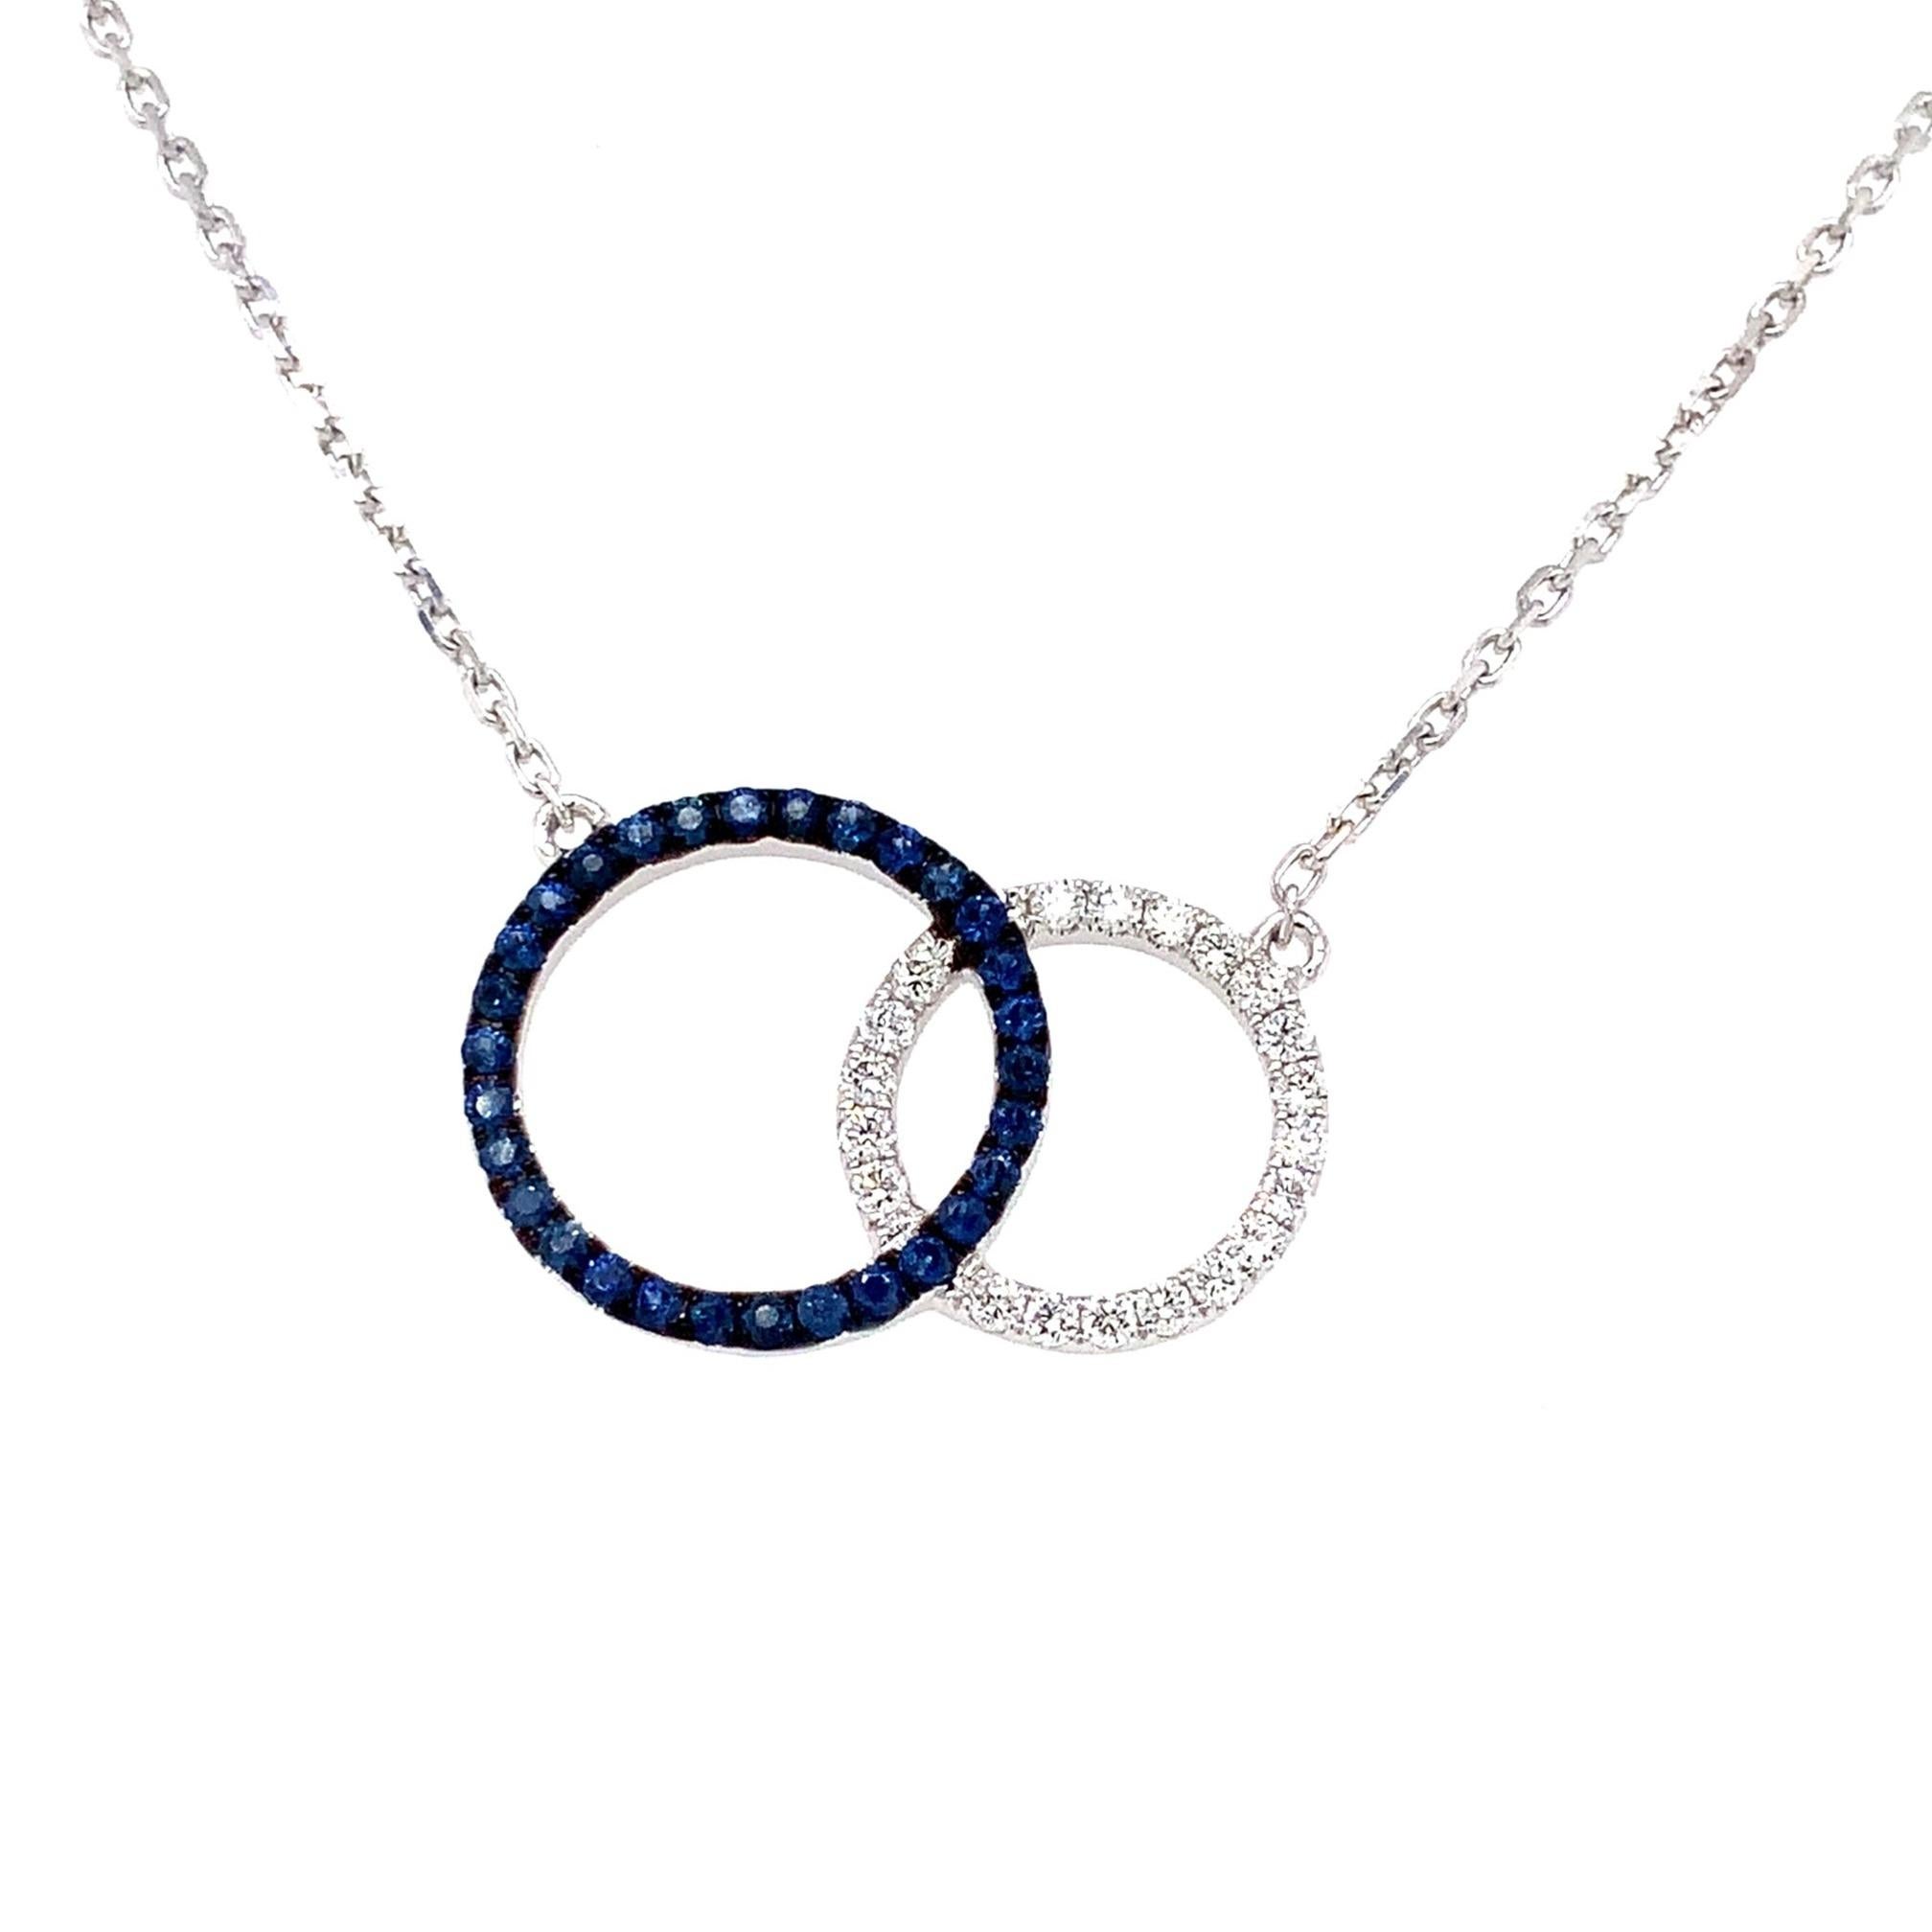 Afarin Collection Love Knot Blue Sapphire and Diamond Necklace Set in 18K White Gold.
20 Round Brilliant Cut Diamond = 0.18 tw.
30 Round Sapphire =0.29 tw
20 x 13.40 x 11.21 mm
18